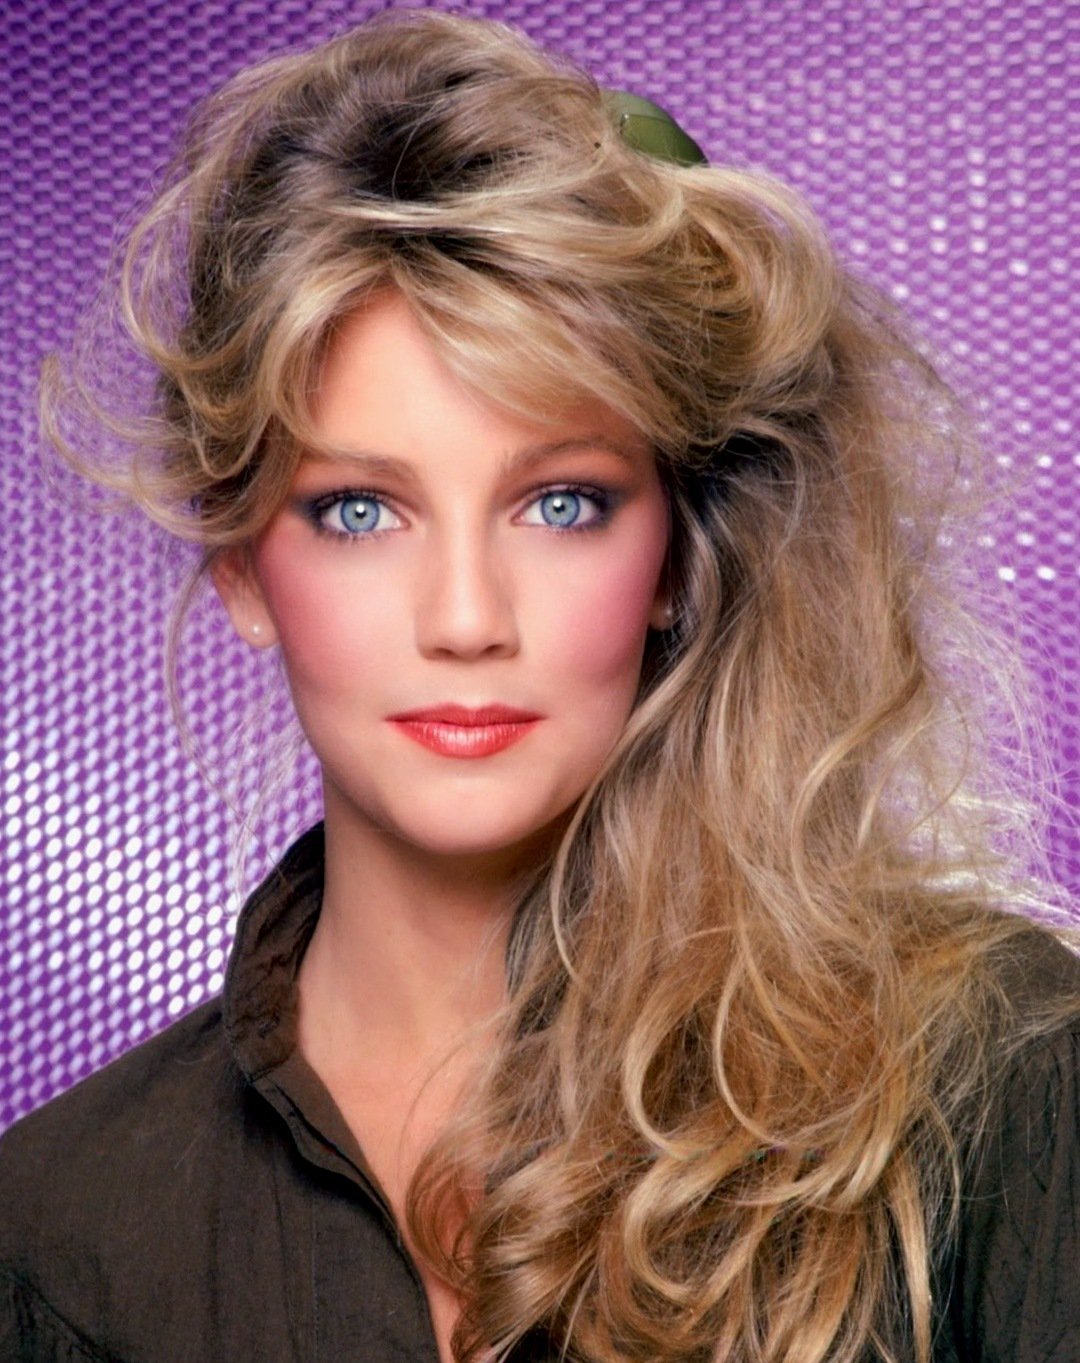 Heather Locklear September 25 Sending Very Happy Birthday Wishes! All the Best! 